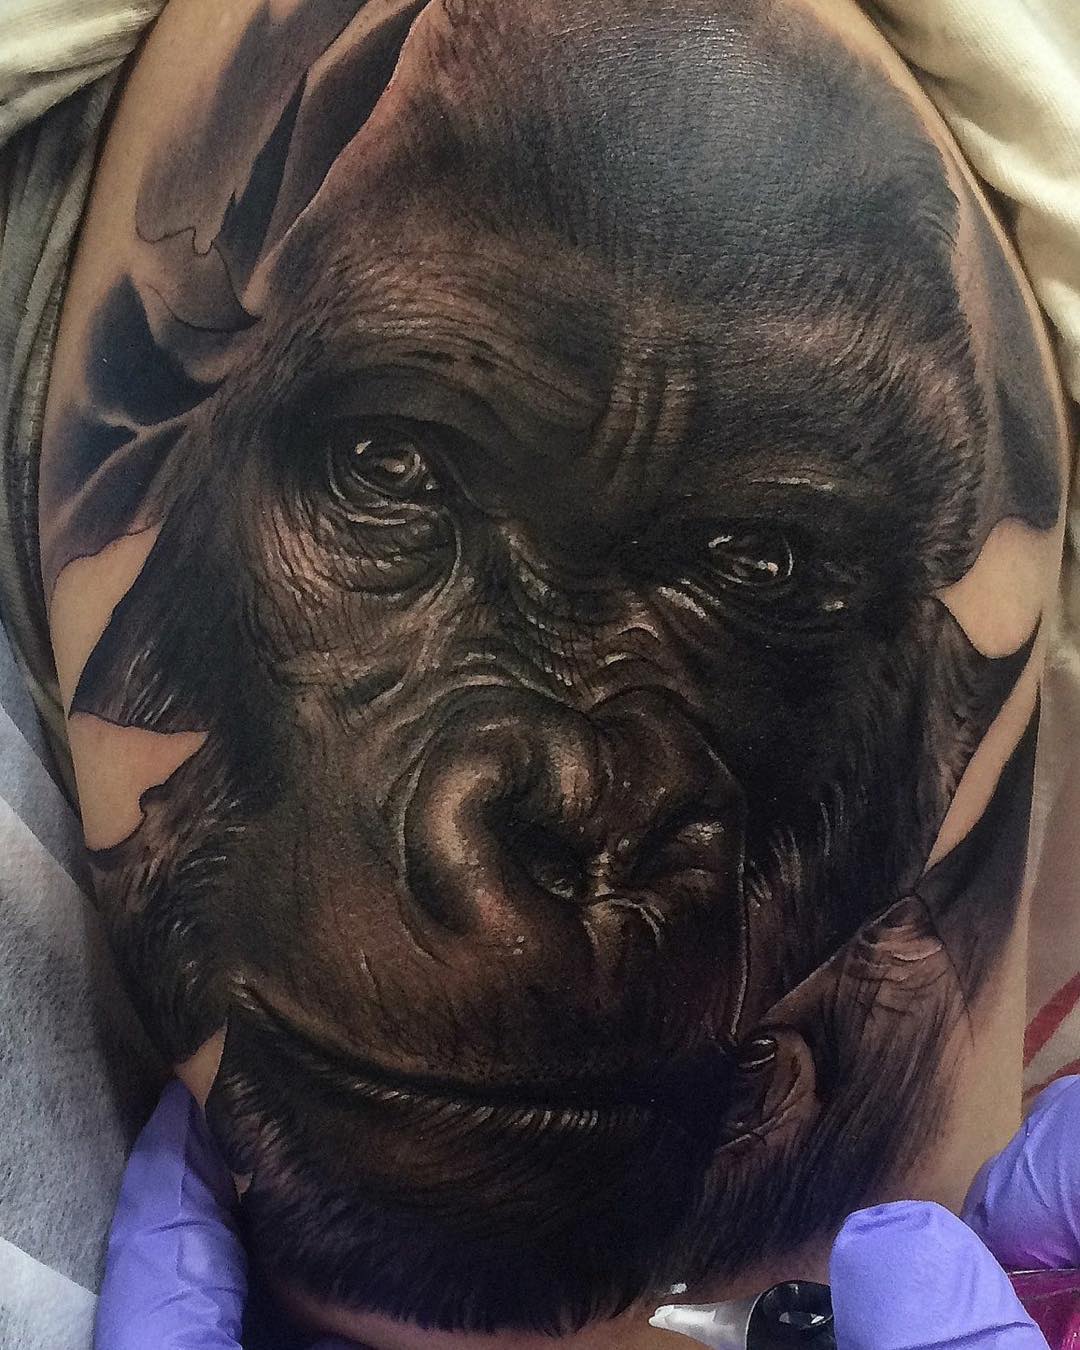 realistic tattoo - close-up face of gorilla in black and gray shades